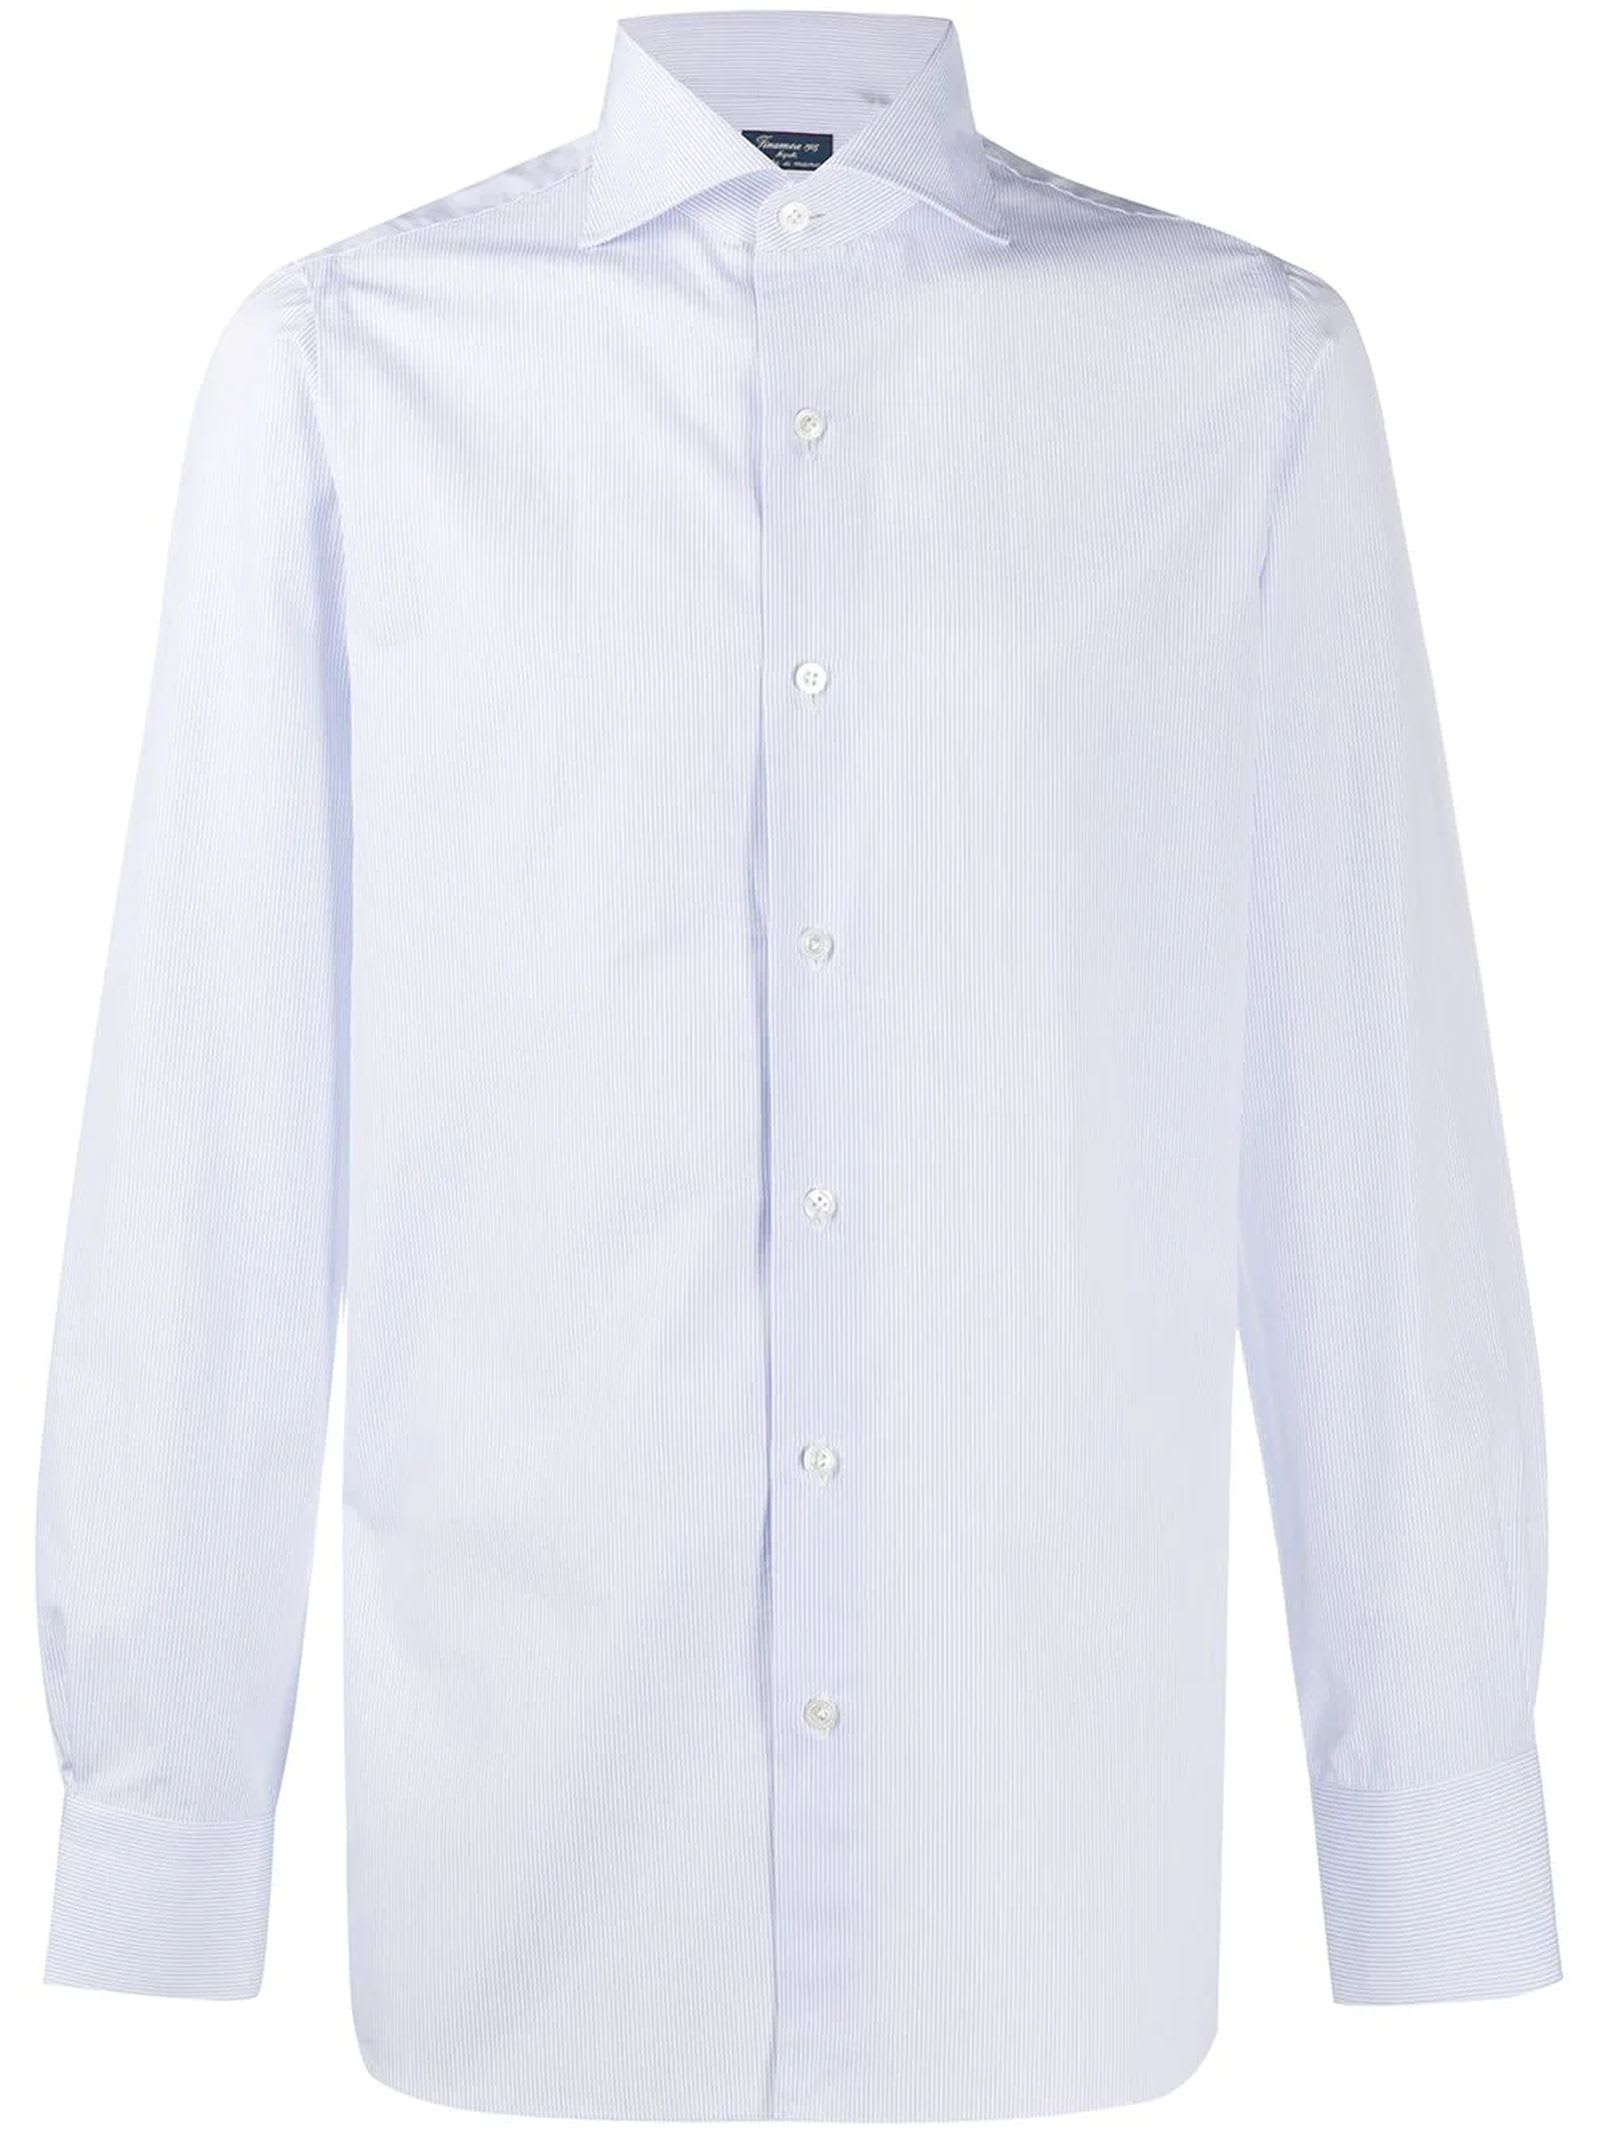 Finamore Light Blue And White Cotton Shirt